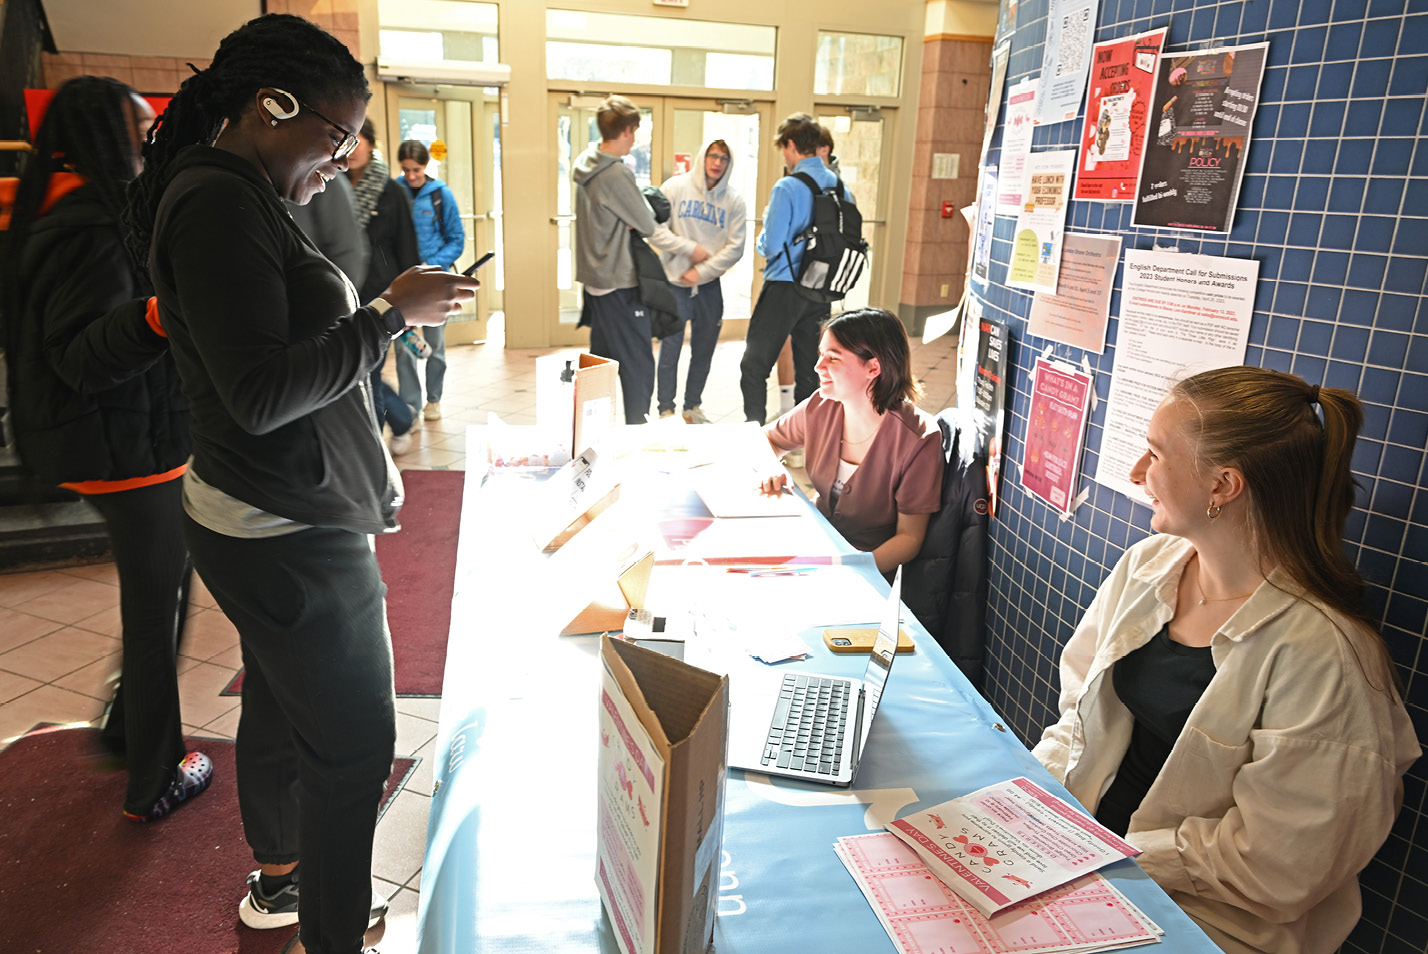 Anike Abegunde ’24 purchases a Candygram from Period. club officers Norah Morrissey ’25, left, and Lydia Evans ’25 at their table set up in the Harris Dining atrium.